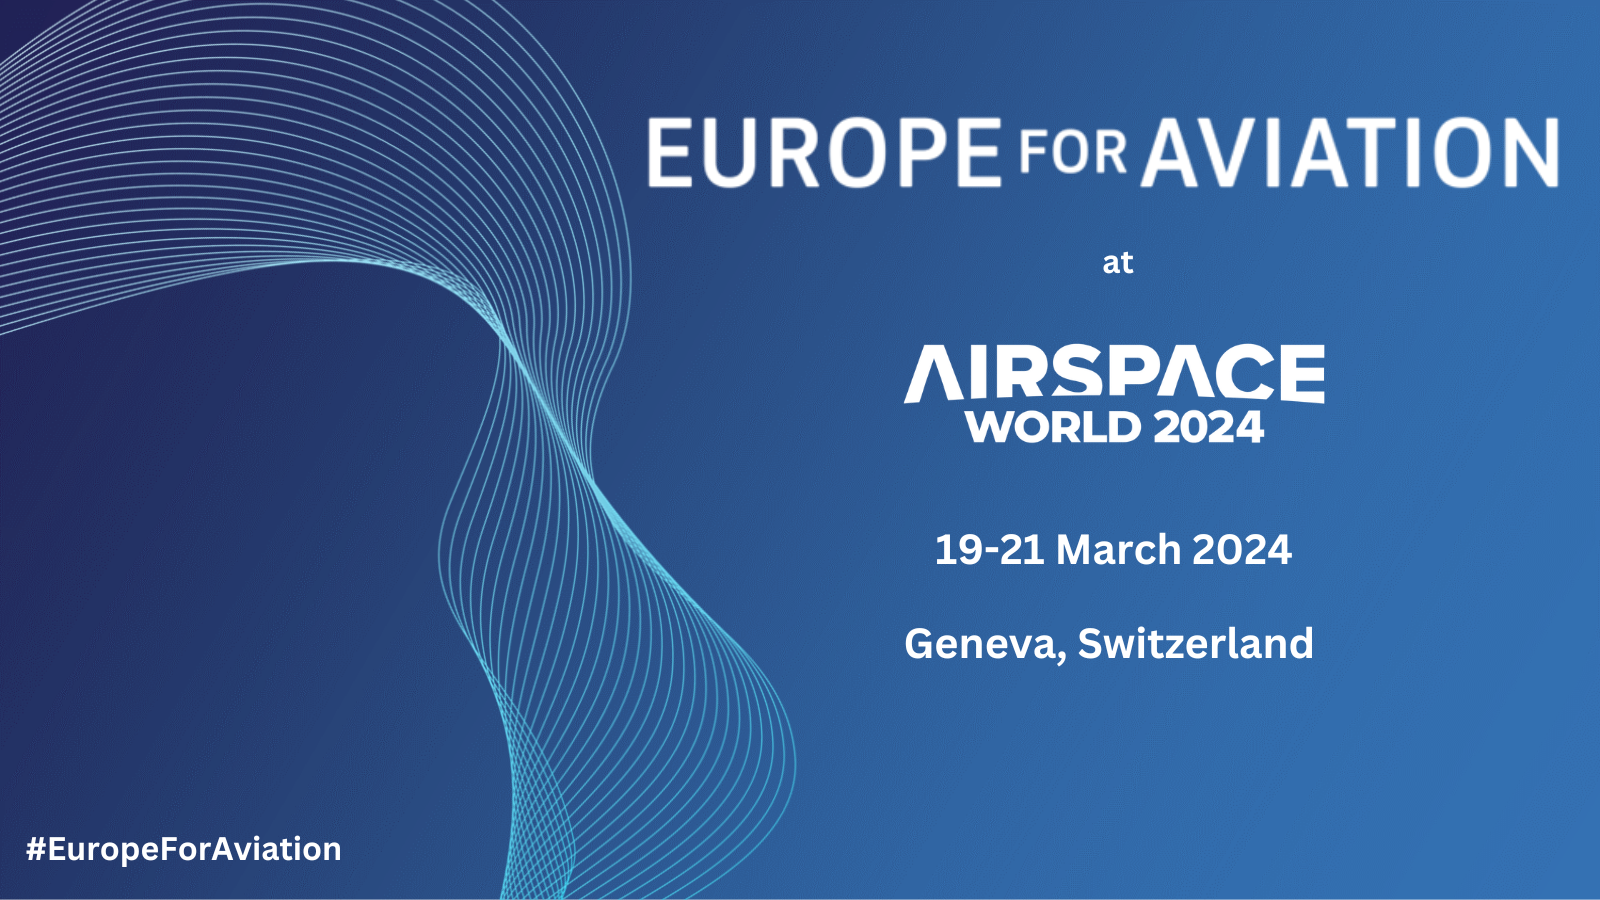 Airspace World 2024